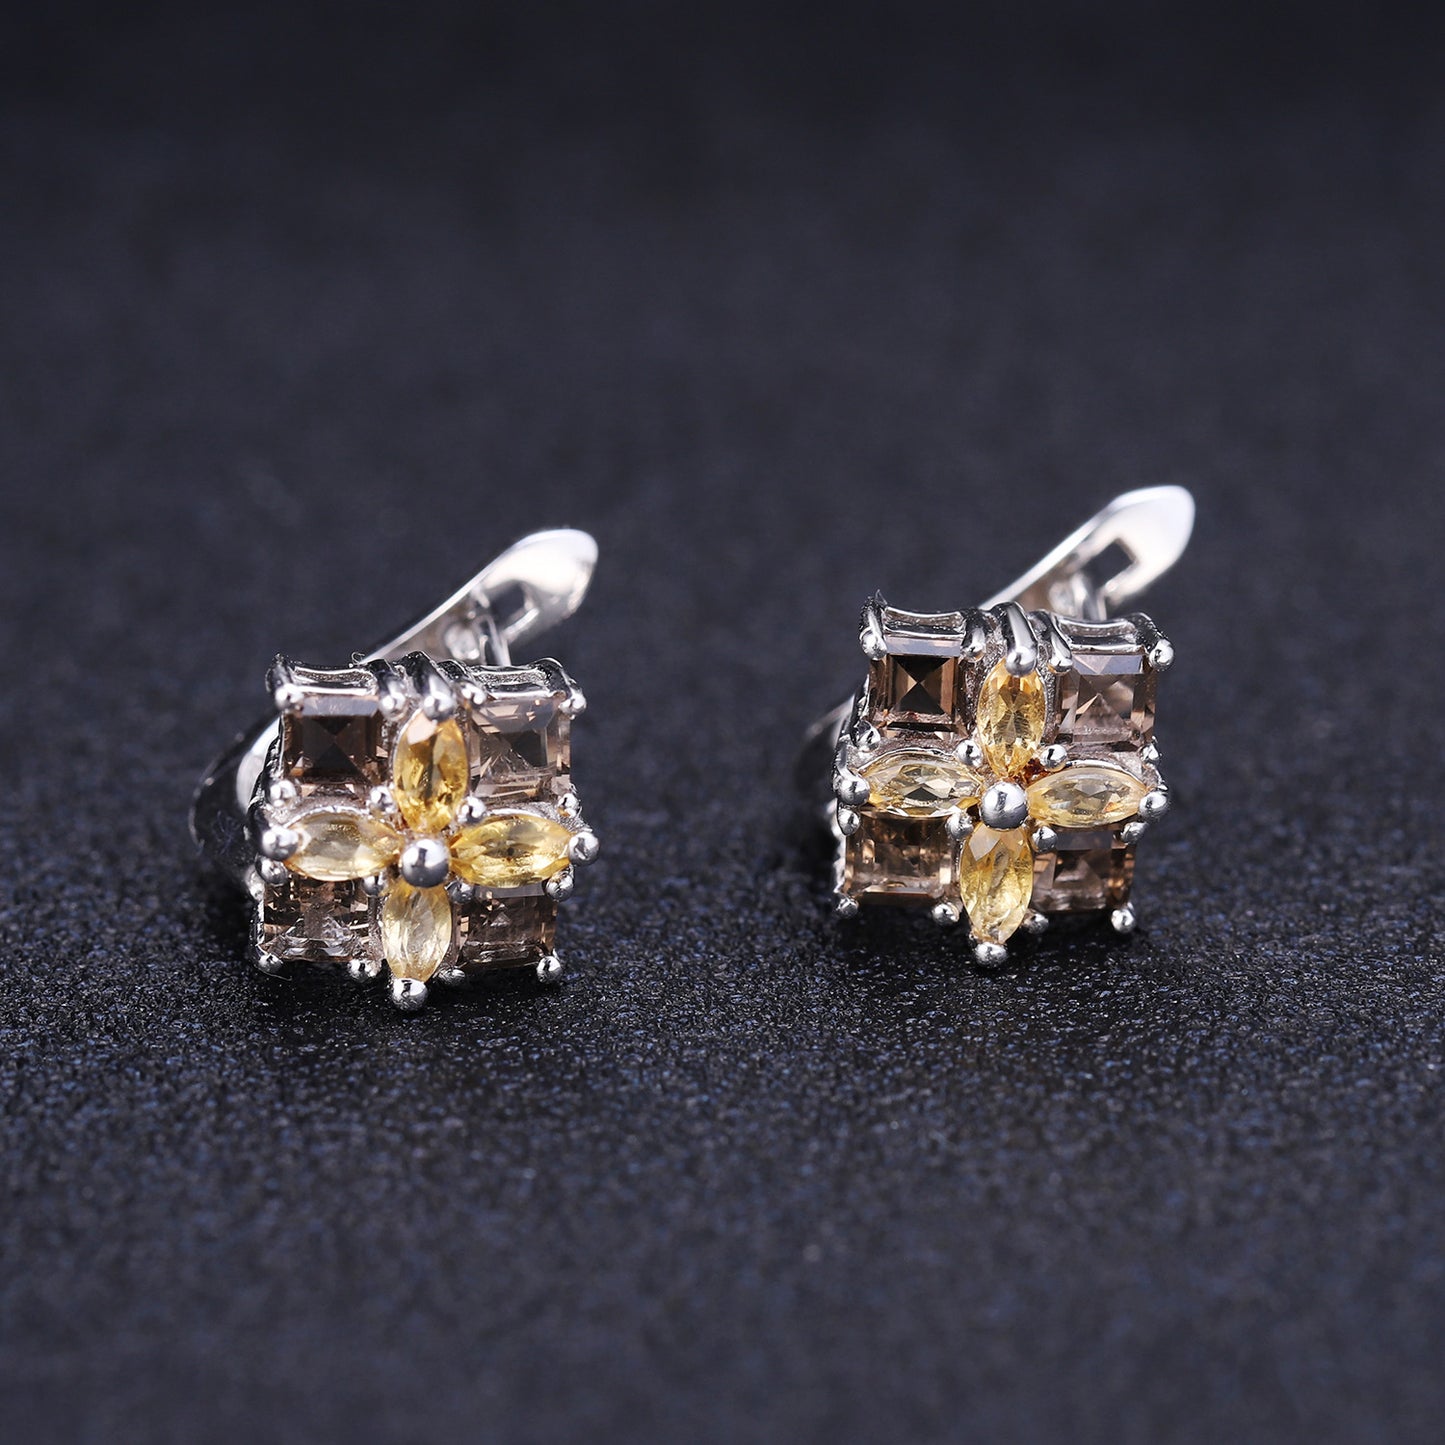 European Inlaid Natural Crystal Square with Clover Silver Studs Earrings for Women